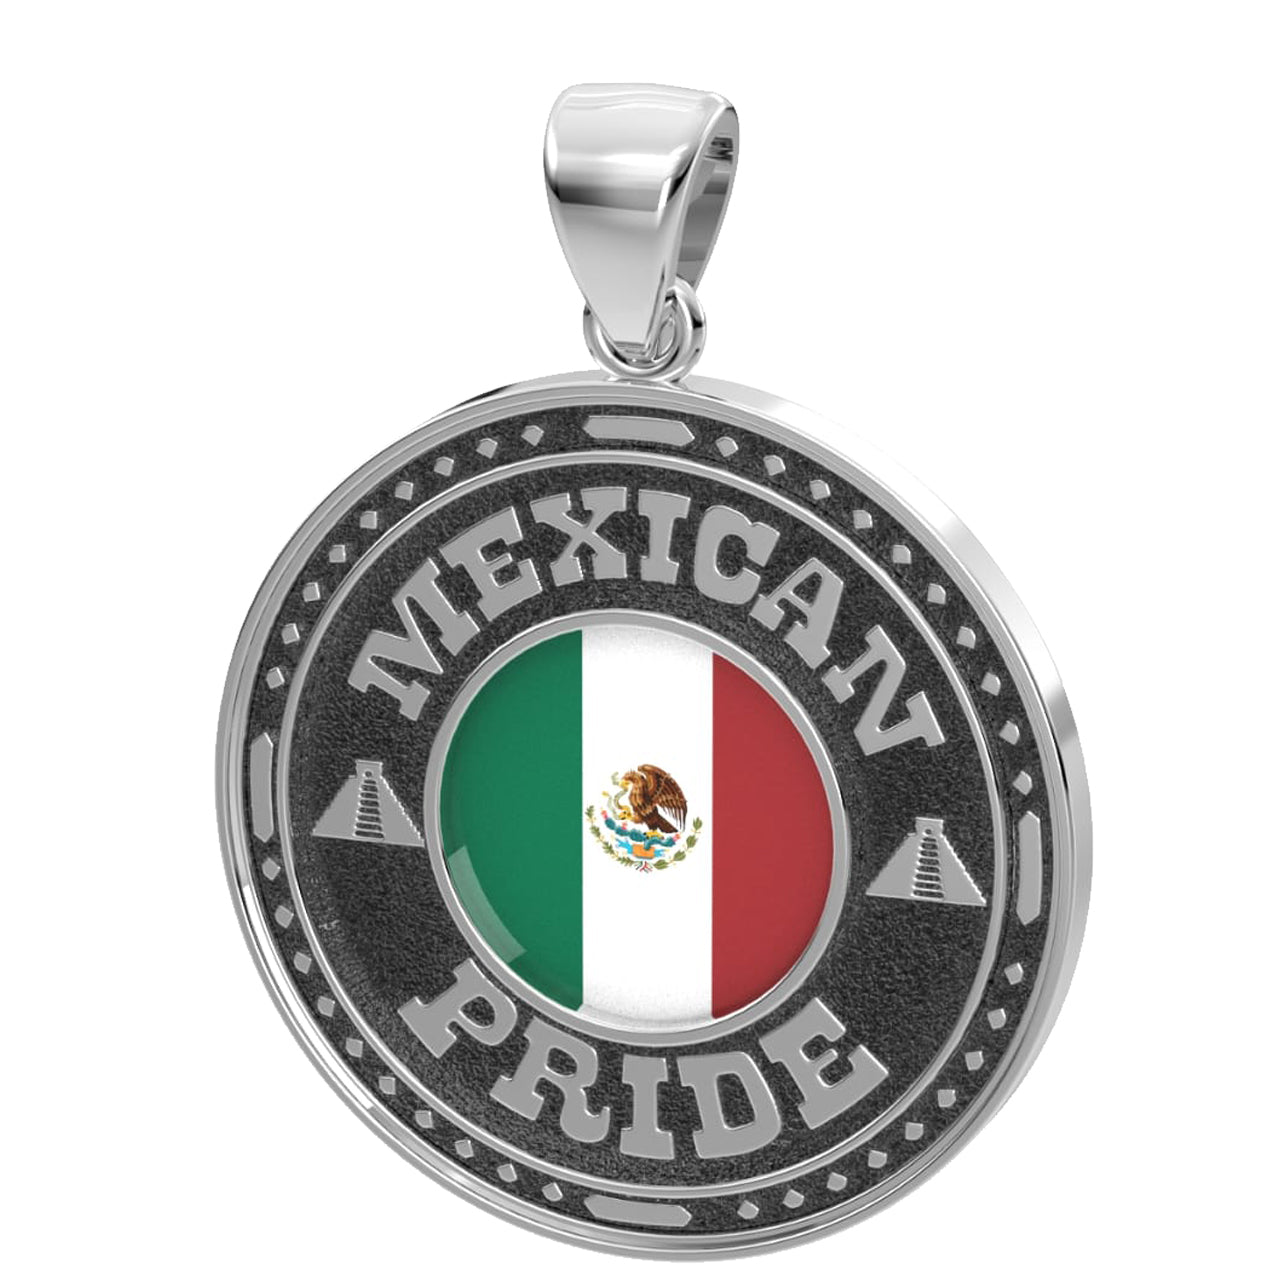 Men's 925 Sterling Silver Mexican Pride Medal Pendant Necklace with Flag, 33mm - US Jewels